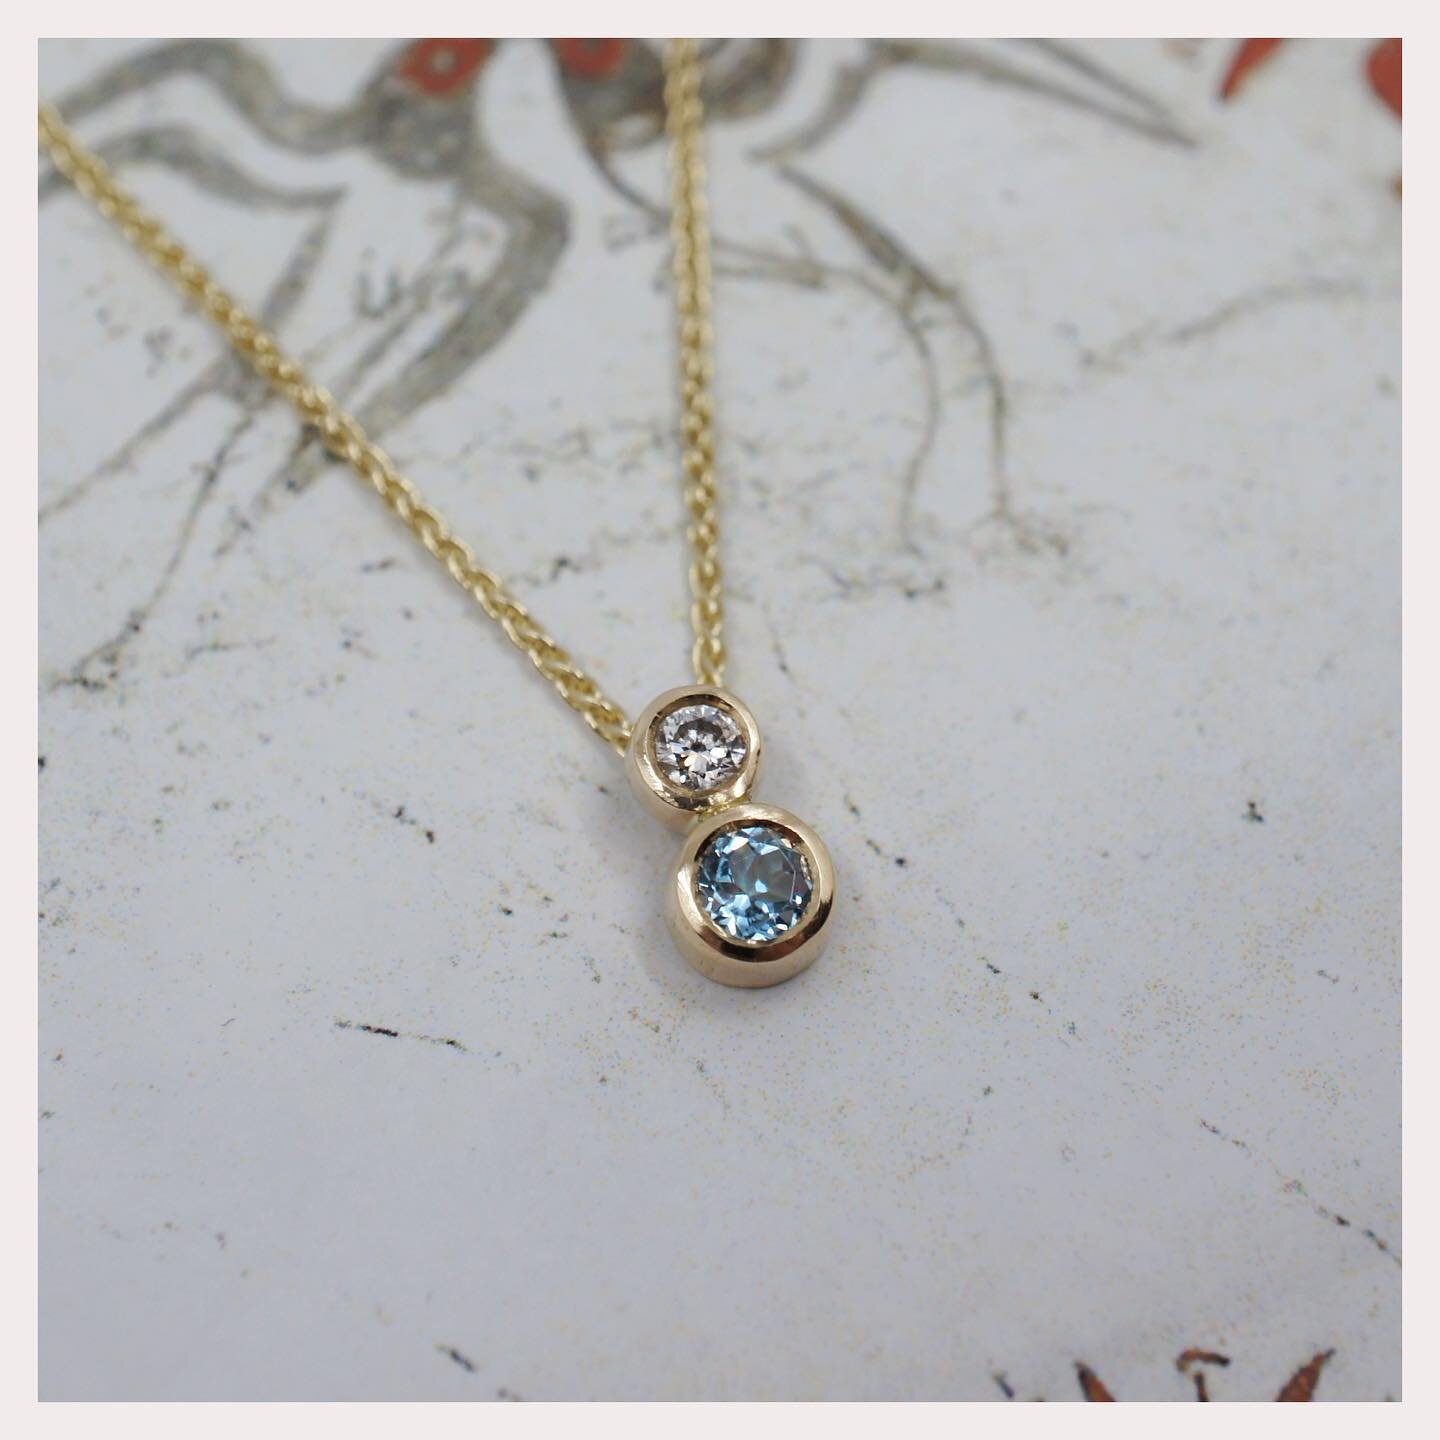 Double bezel pendant fresh out the workshop.

Made from recycled gold ♻️ Set with a fully traceable Canadian diamond 💎 Using our customers inherited aquamarine 💫

#ethicaljewellery #bespokejewellery #bespokejeweller #ethicaldiamonds #canadiandiamon